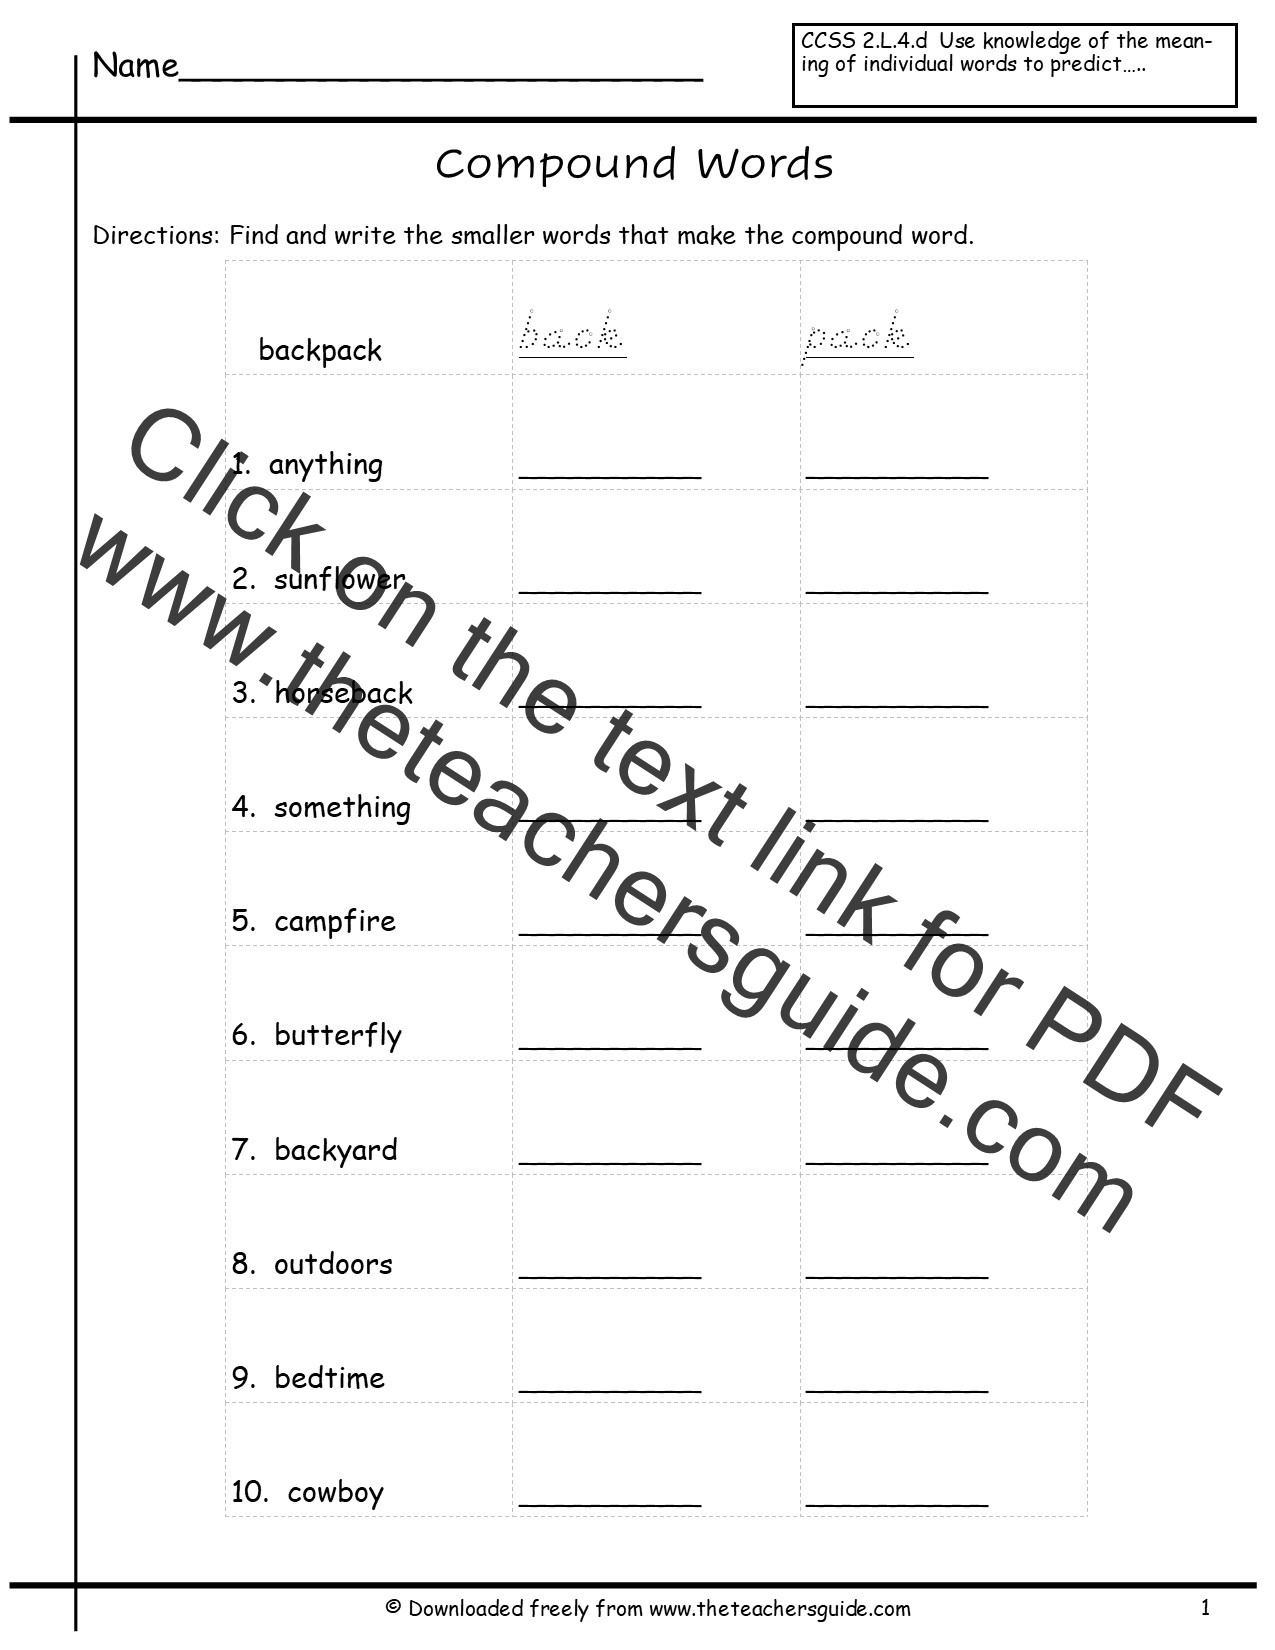 Compound Word Worksheets From The Teacher s Guide